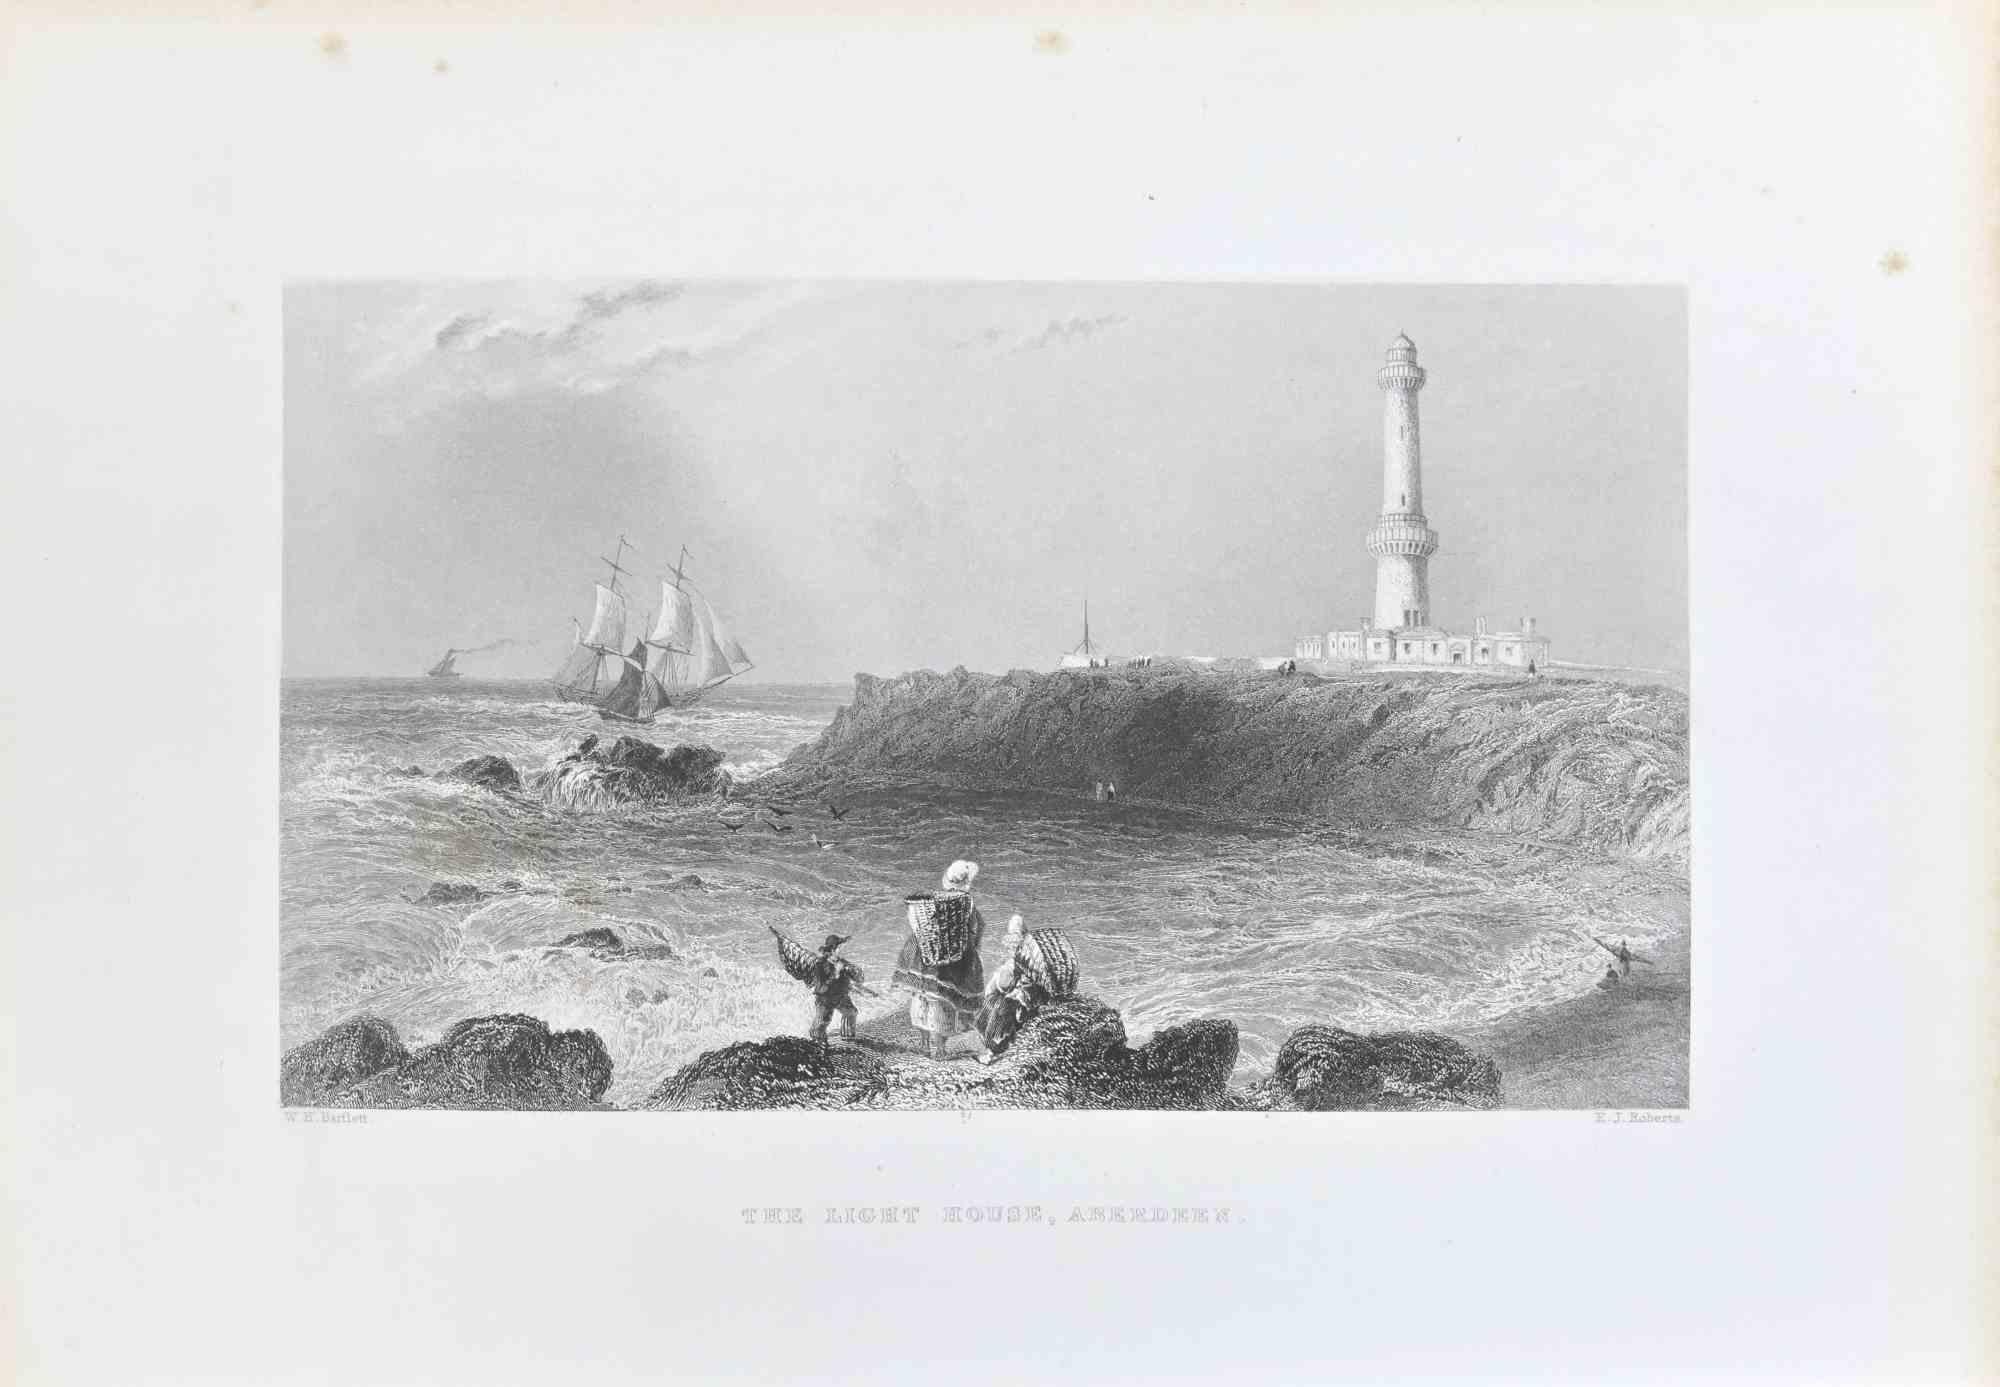 The Light House, Aberdeen is an etching realized in 1845 by W. H. Bartlett.

Signed on the plate. 

Titled on the lower center.

Good conditions with slight foxing.

The artwork is beautifully realized in a well-balanced composition through short,